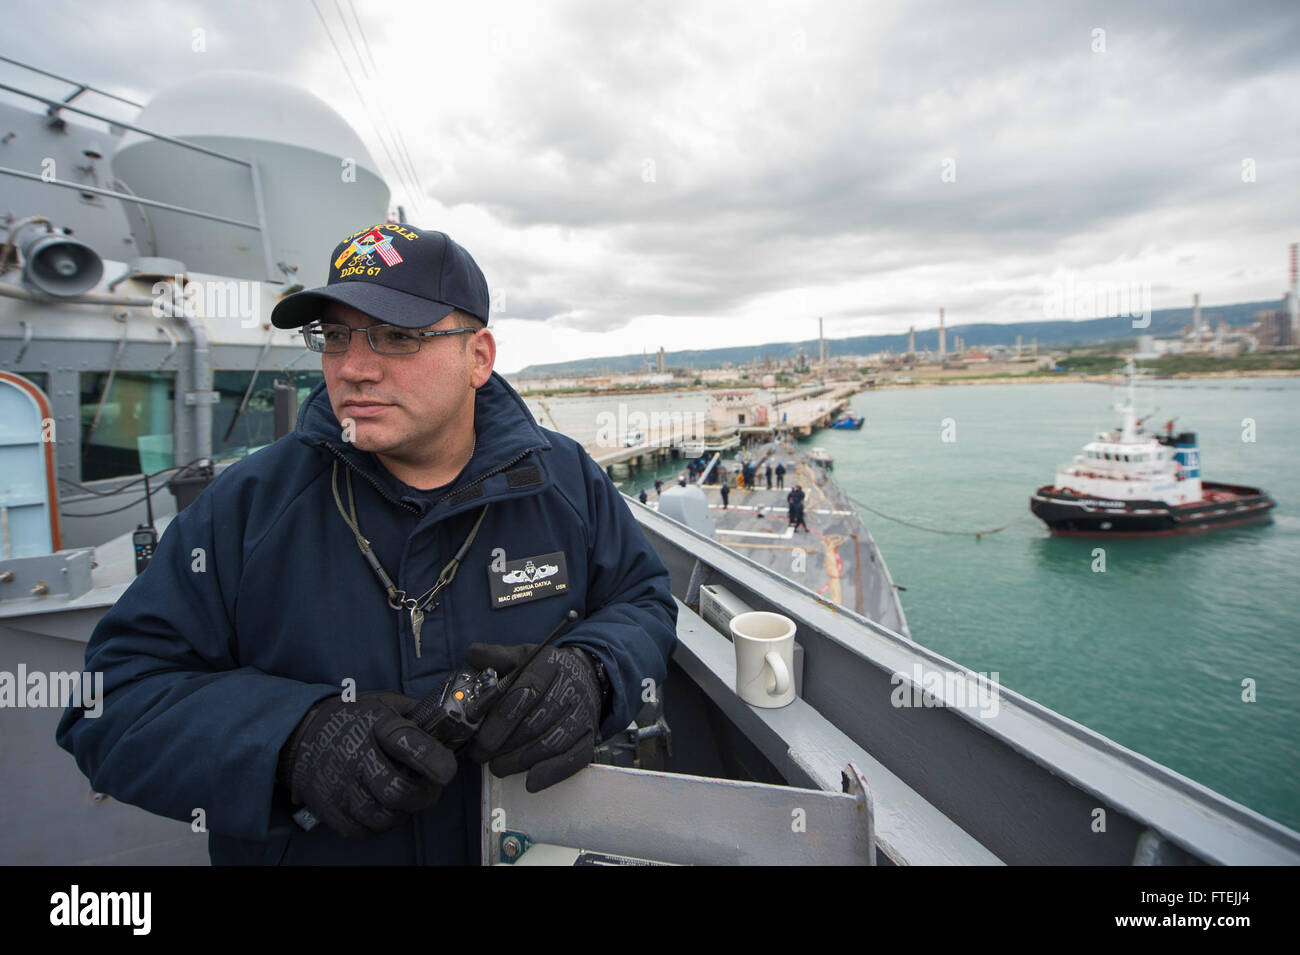 AUGUSTA BAY, Italy (Dec. 11, 2014) – Chief Master-at-Arms Joseph Datka, from Oconomowoc, Wisconsin, monitors civilian tugboats as USS Cole (DDG 67) departs Augusta Bay following a scheduled port visit Dec. 11 2014. Cole, an Arleigh Burke-class guided-missile destroyer, homeported in Norfolk, is conducting naval operations in the U.S. 6th Fleet area of operations in support of U.S. national security interests in Europe. Stock Photo